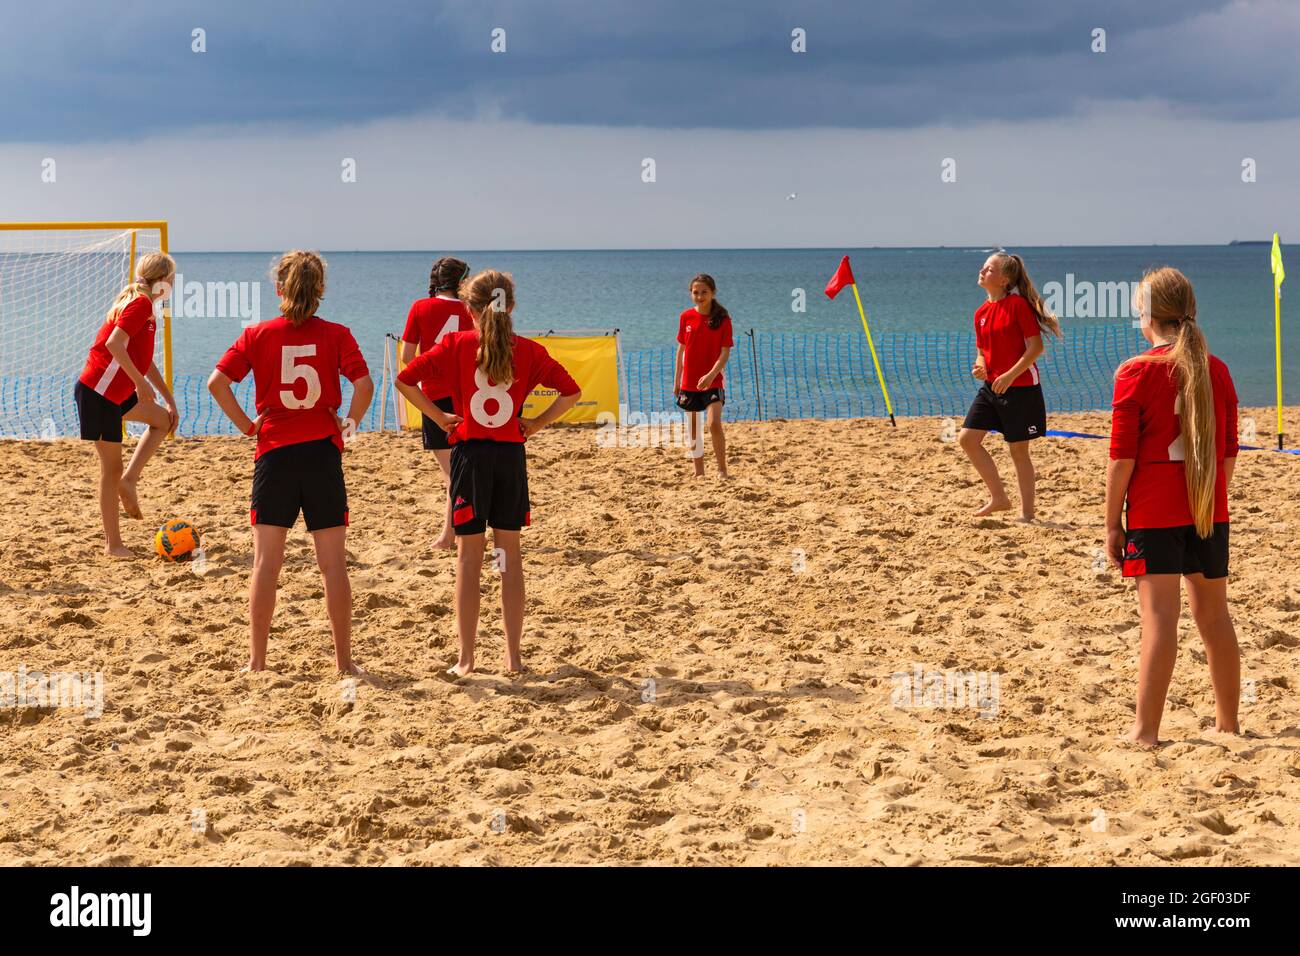 Bournemouth, Dorset, UK. 22nd August 2021. Beach Fest, International beach soccer, the final day of the festival takes place on the beach at Bournemouth, with over 60 beach soccer teams competing with teams of boys, girls, men and women. As well as beach soccer, there is beach volleyball, foot volley and teqball showcase matches. Girls playing beach soccer. Credit: Carolyn Jenkins/Alamy Live News Stock Photo